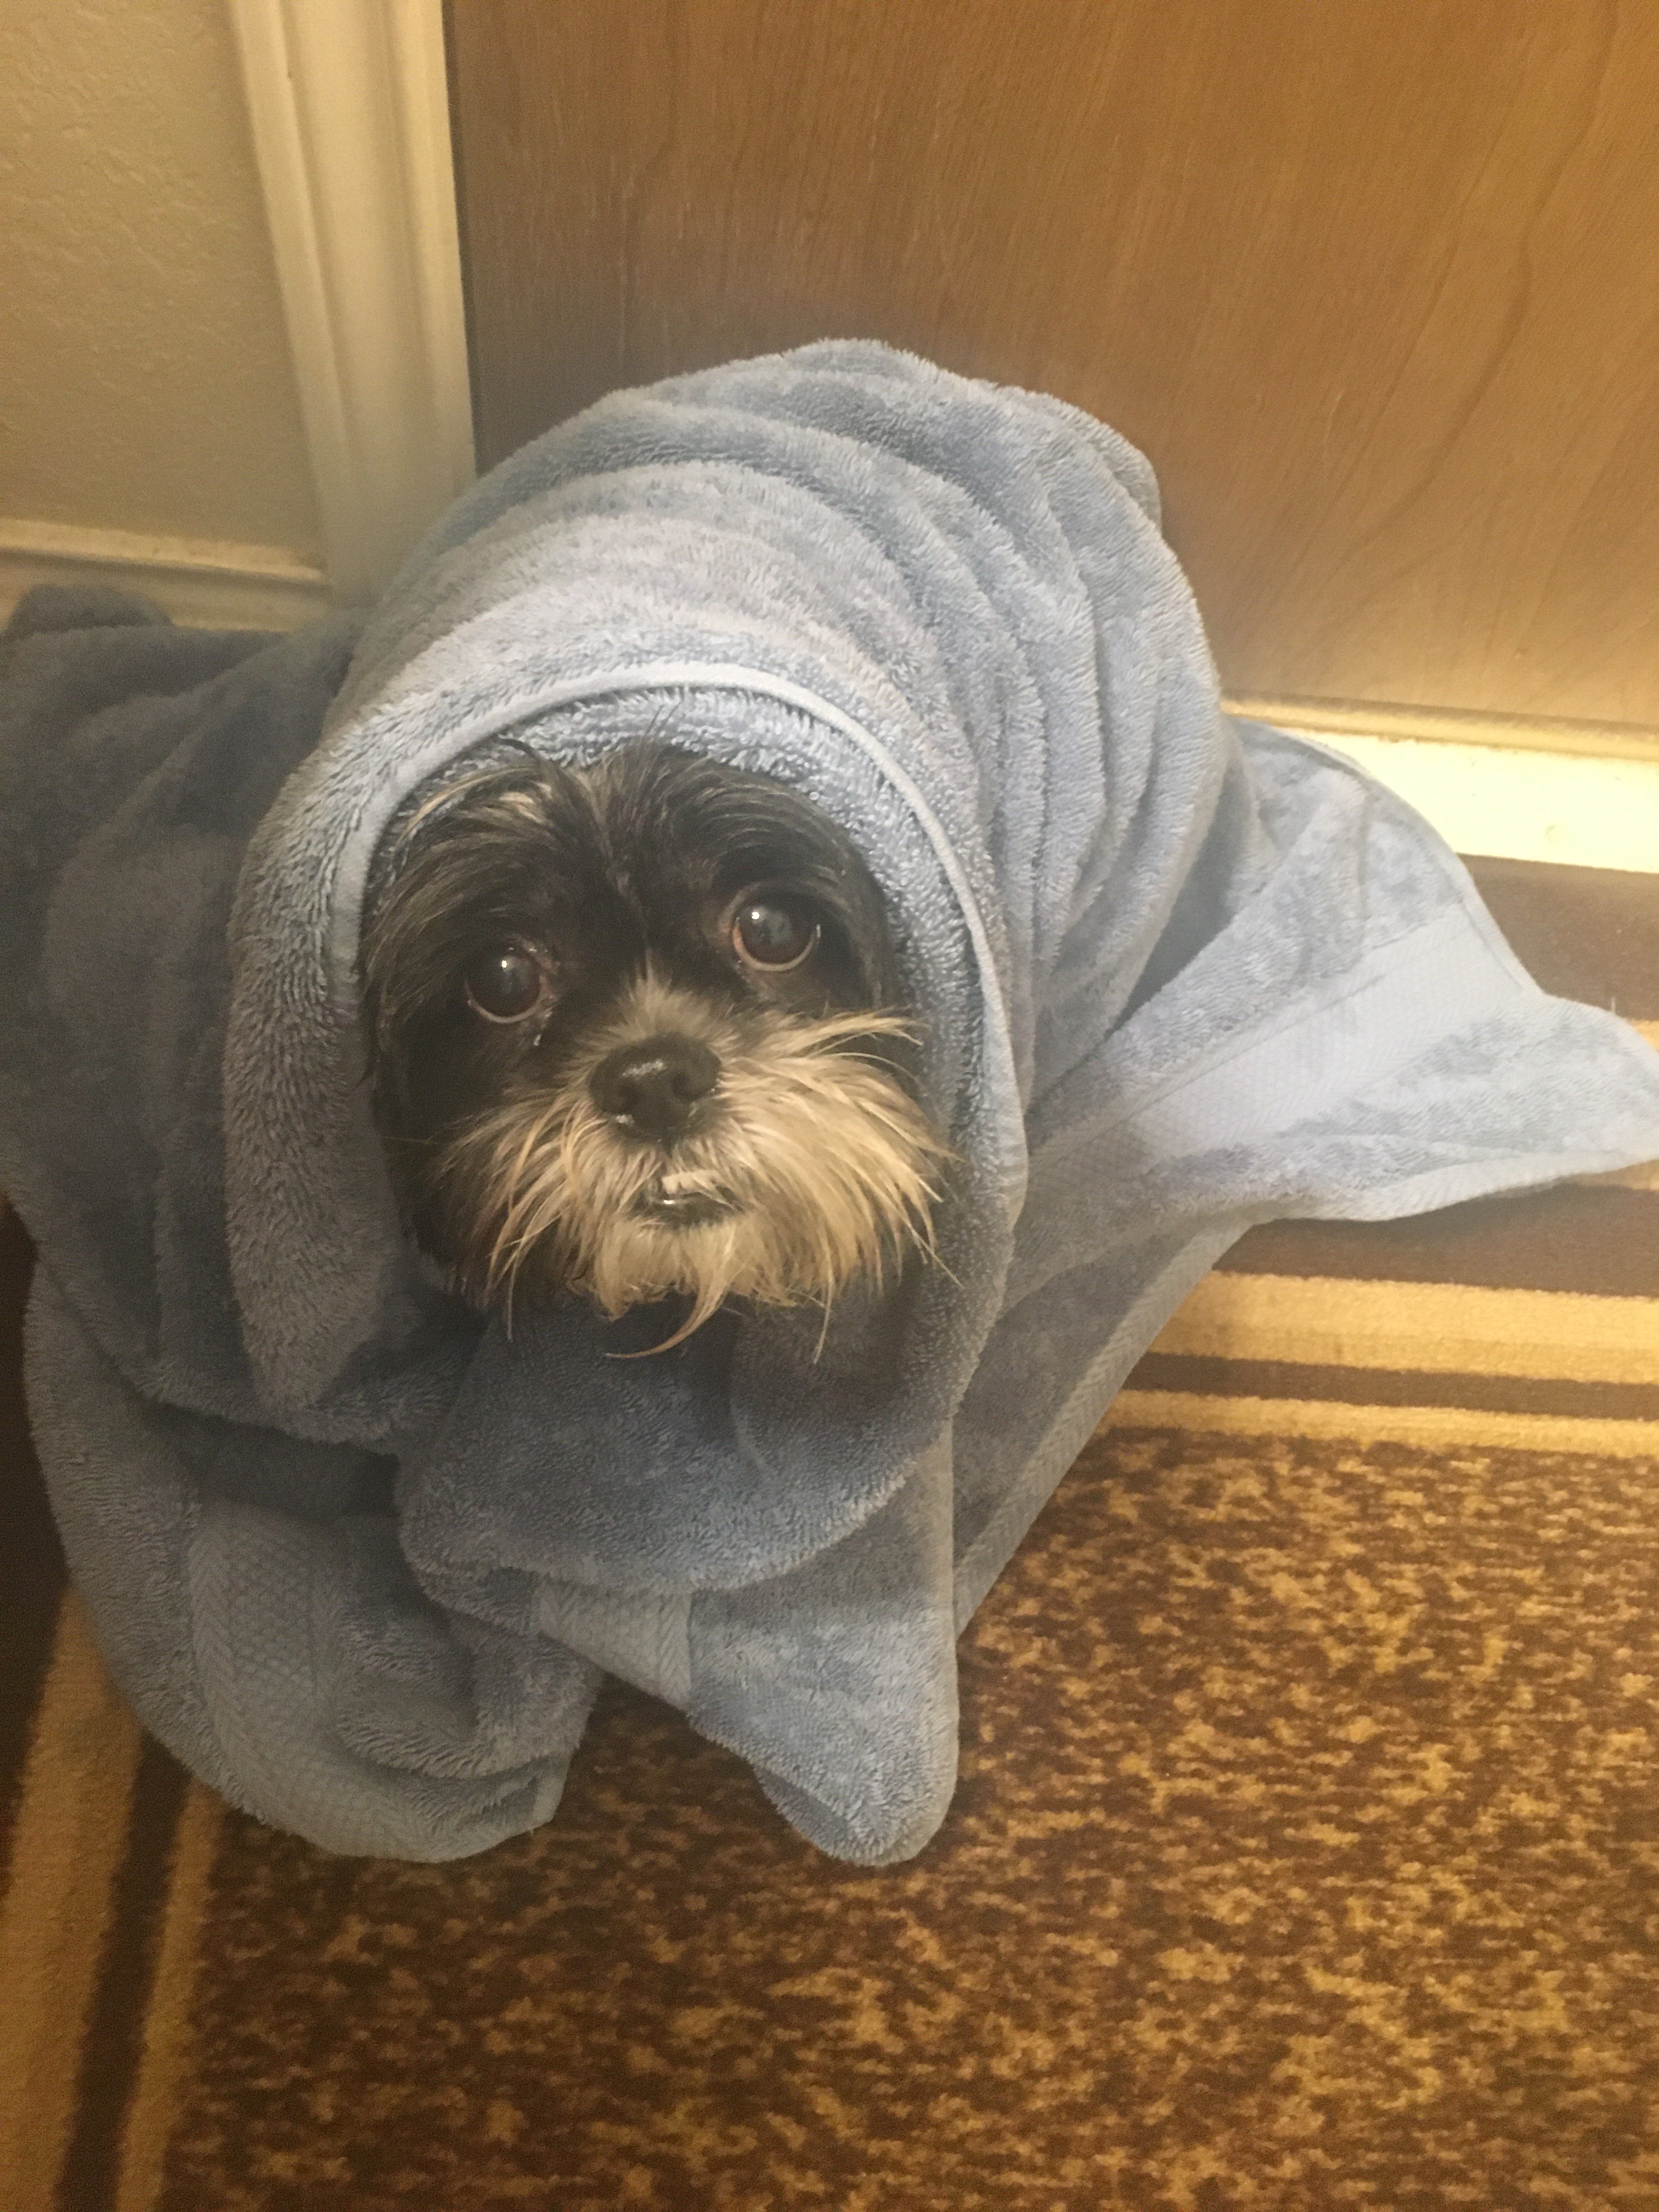 the shih tzu is wrapped in a blue towel sitting on a rug against a wall. only her face is visible, with a wet and unkempt mustache, a small nose, and two sad-looking eyes.